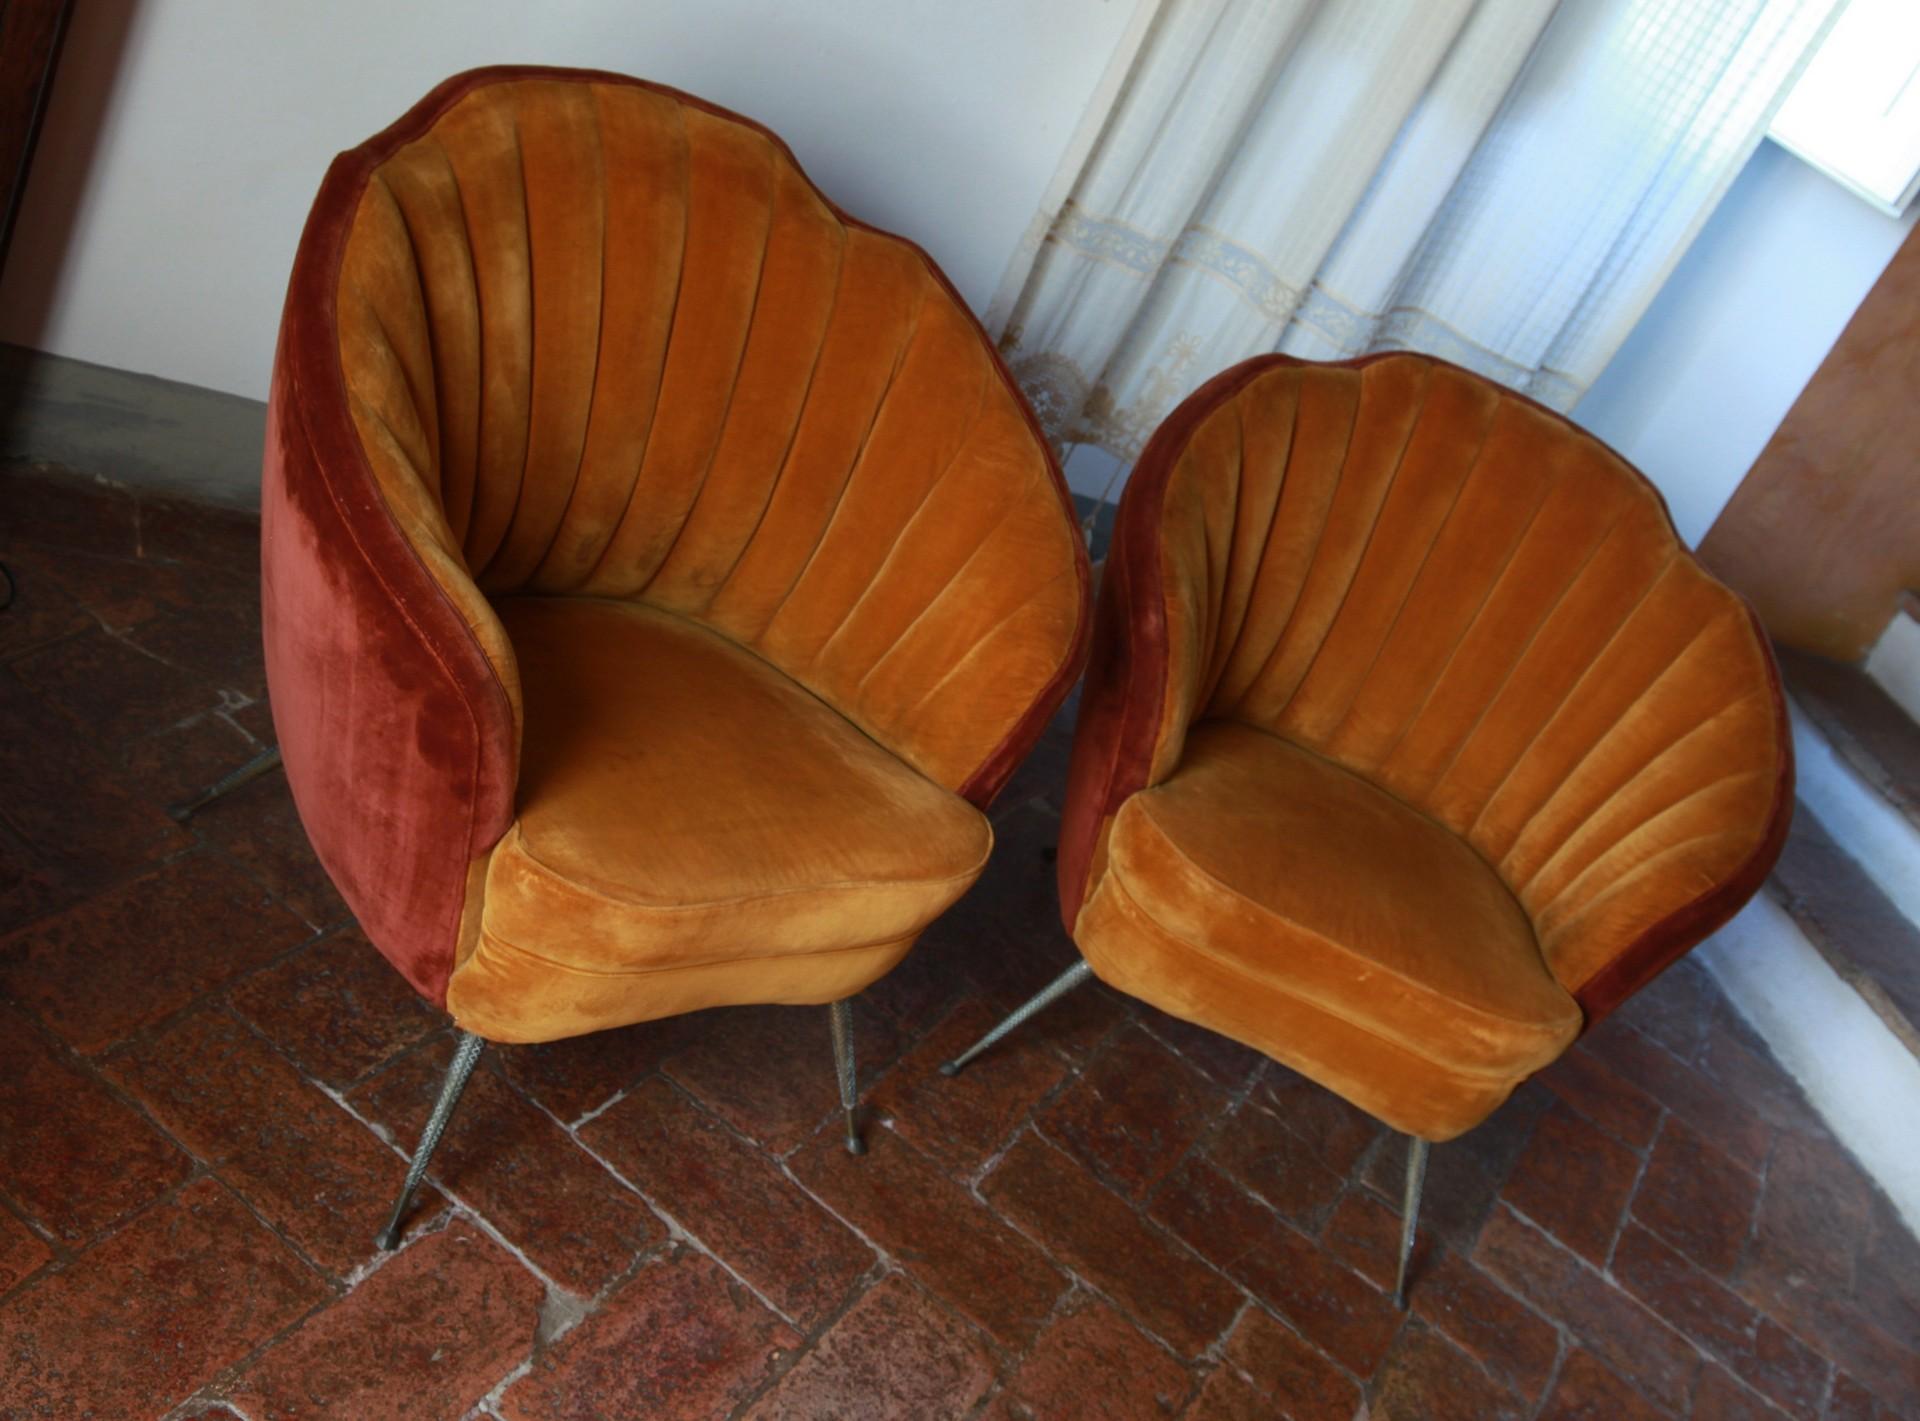 Two charming shell armchairs. The chairs have an incredible care for details. 
Brass legs are in casting fusion and are probably made to represent fish or reptile skin. 
The quality of stitching and curves on the back are indicating a Brianza